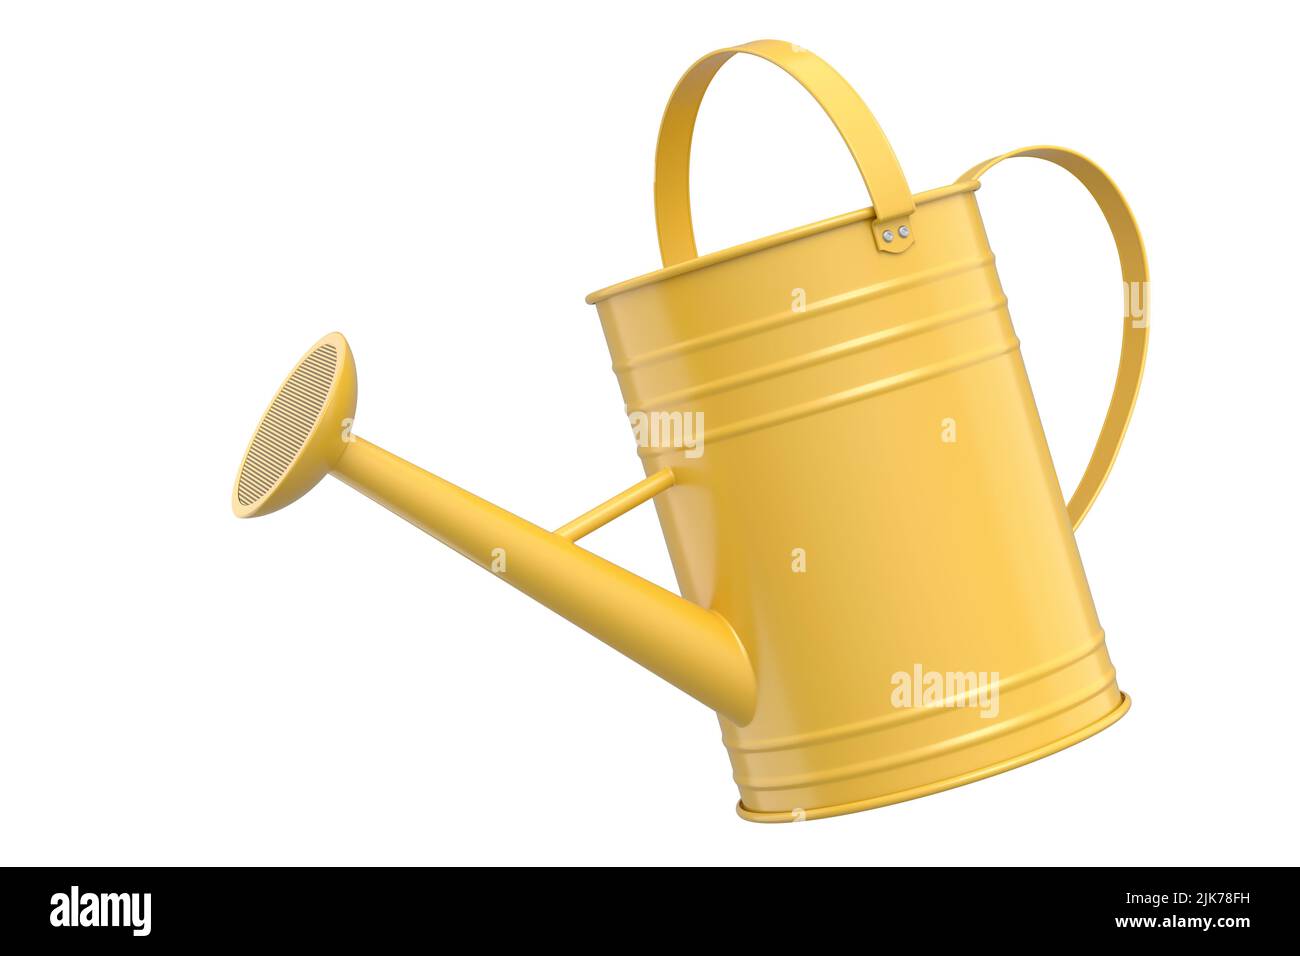 Watering can isolated on a white background. 3d render concept of gardening equipment tools for farm and harvesting Stock Photo